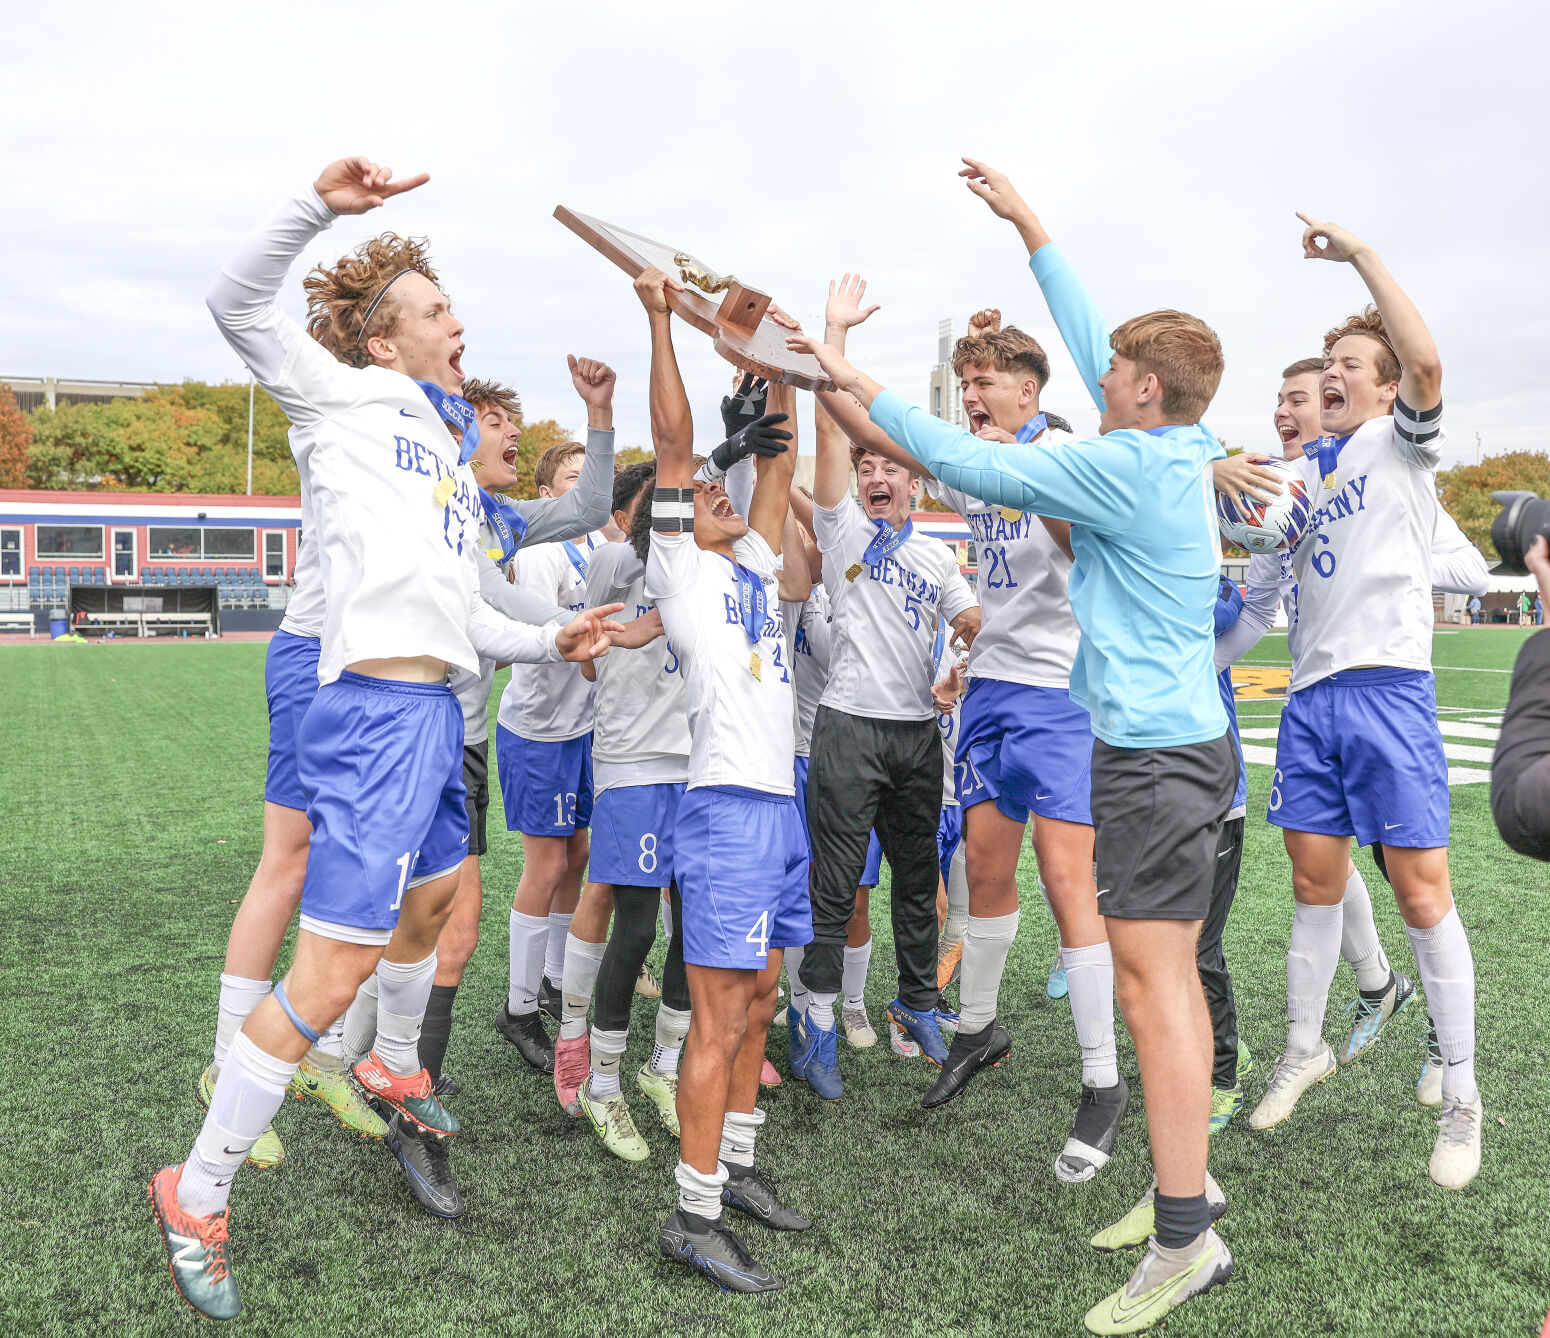 Exciting Sports News: State Titles, Record-Breaking Performances, and Historic Appearances